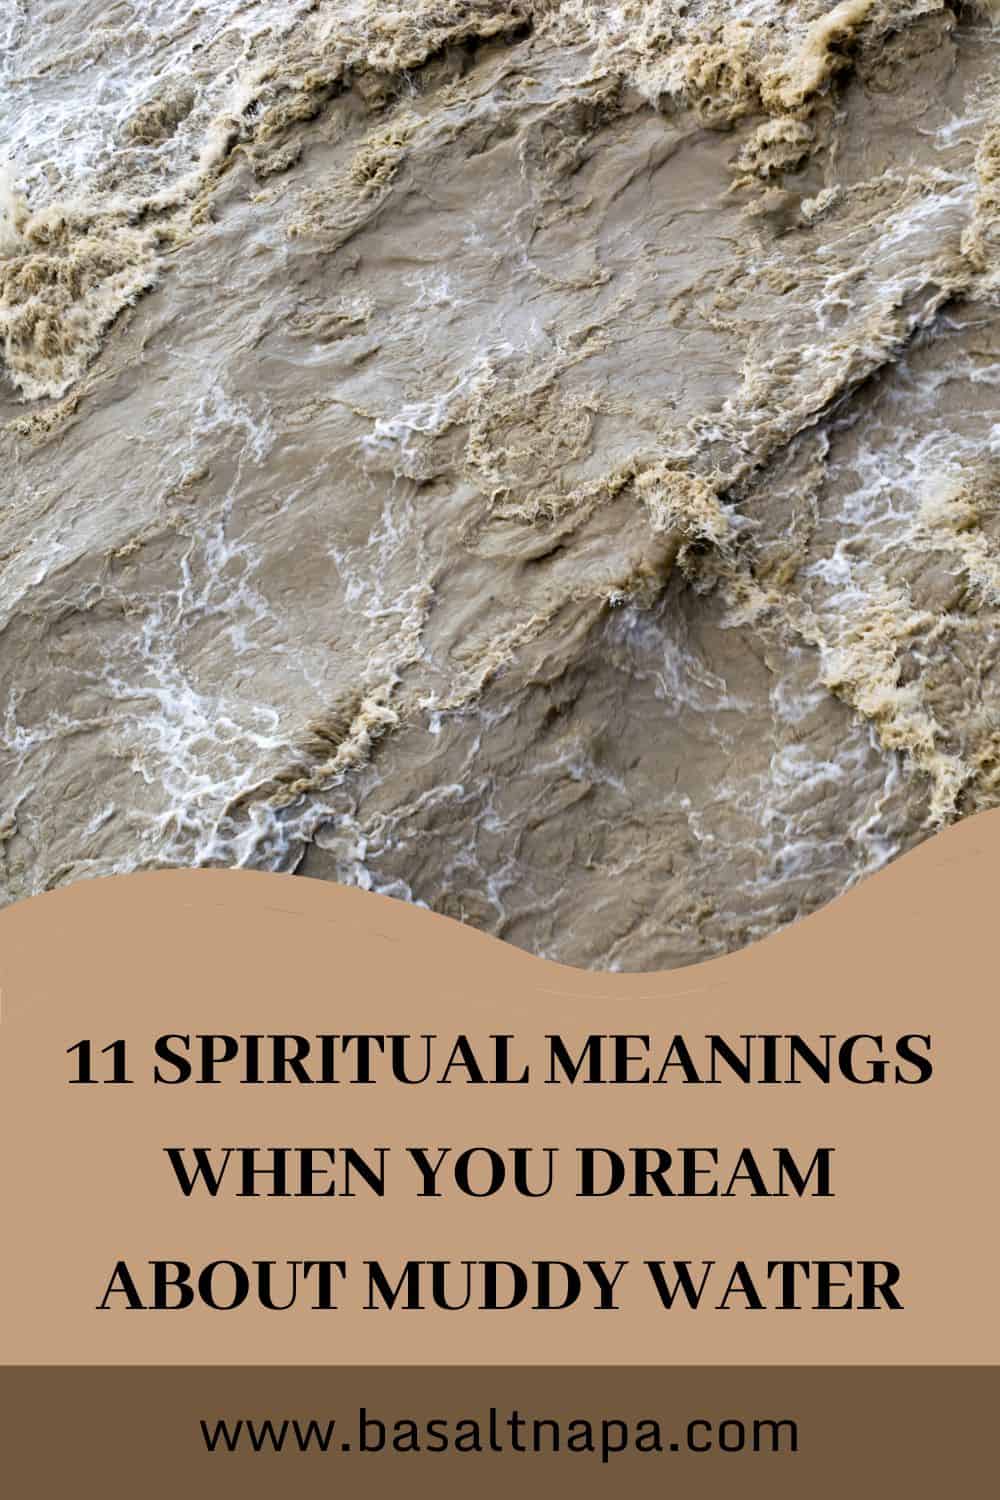 Meaning Of Swimming In Dirty Water Dreams